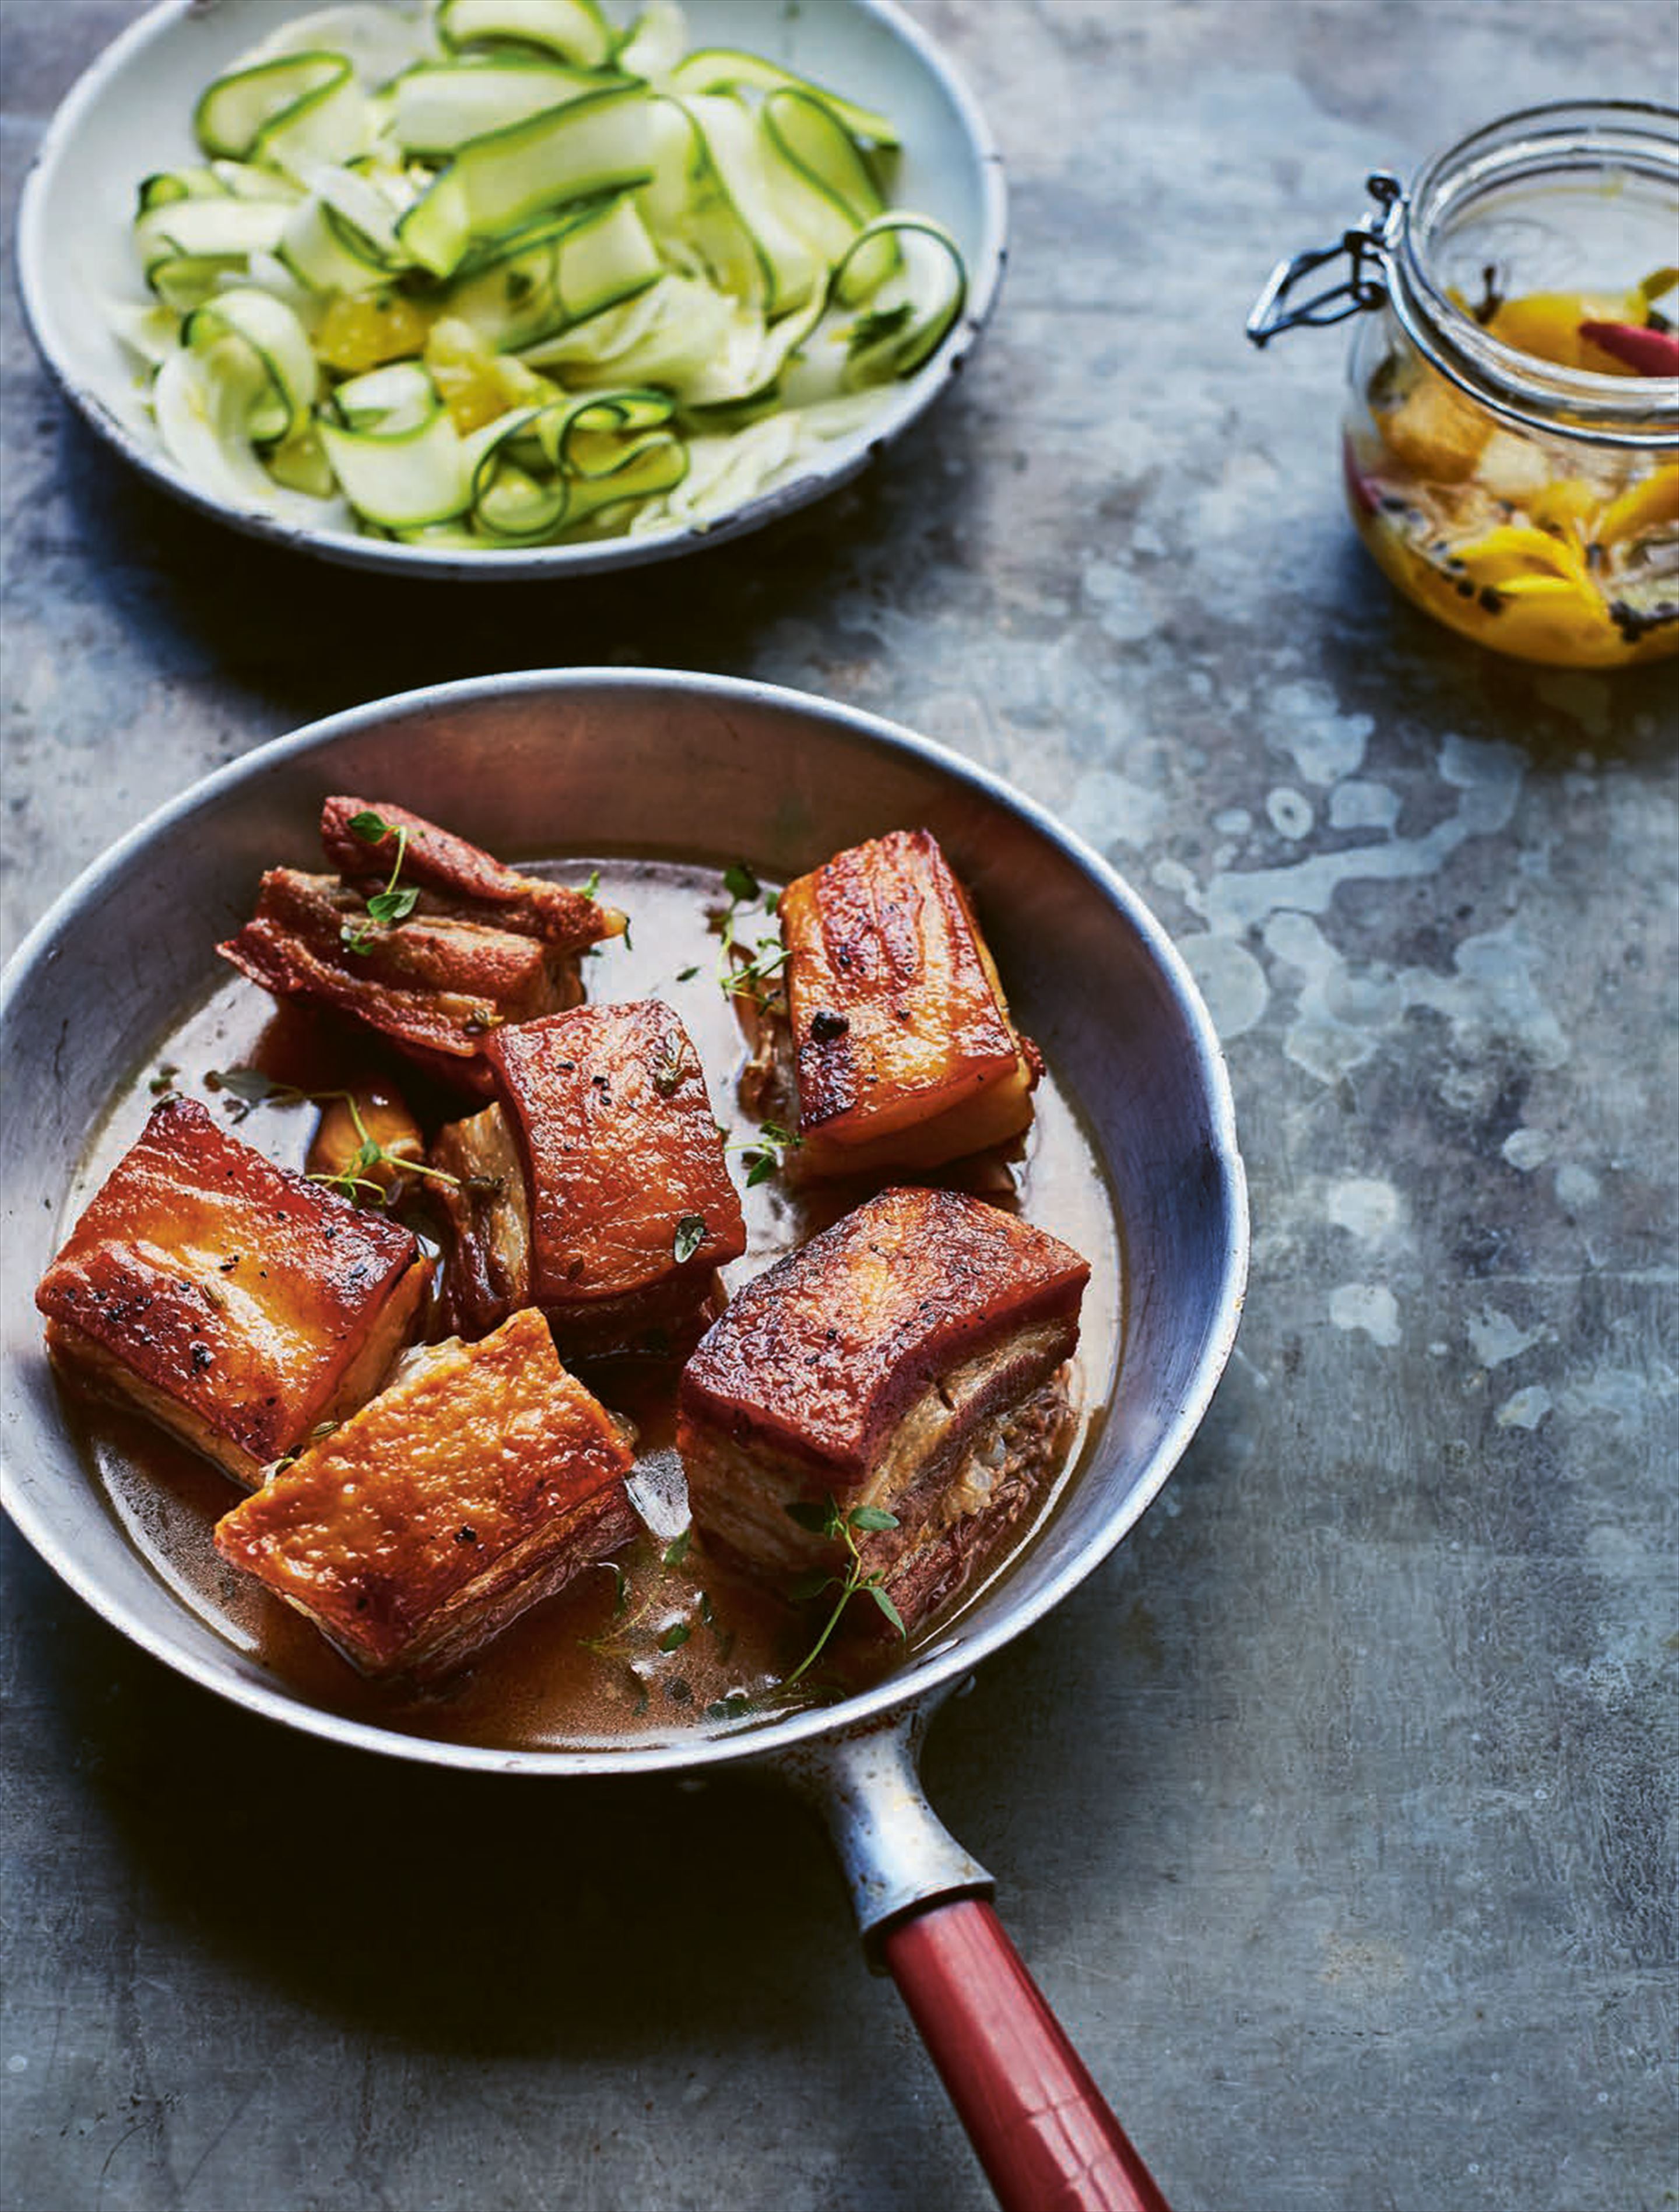 Pan-fried pork belly with courgettes, fennel & preserved lemon salad